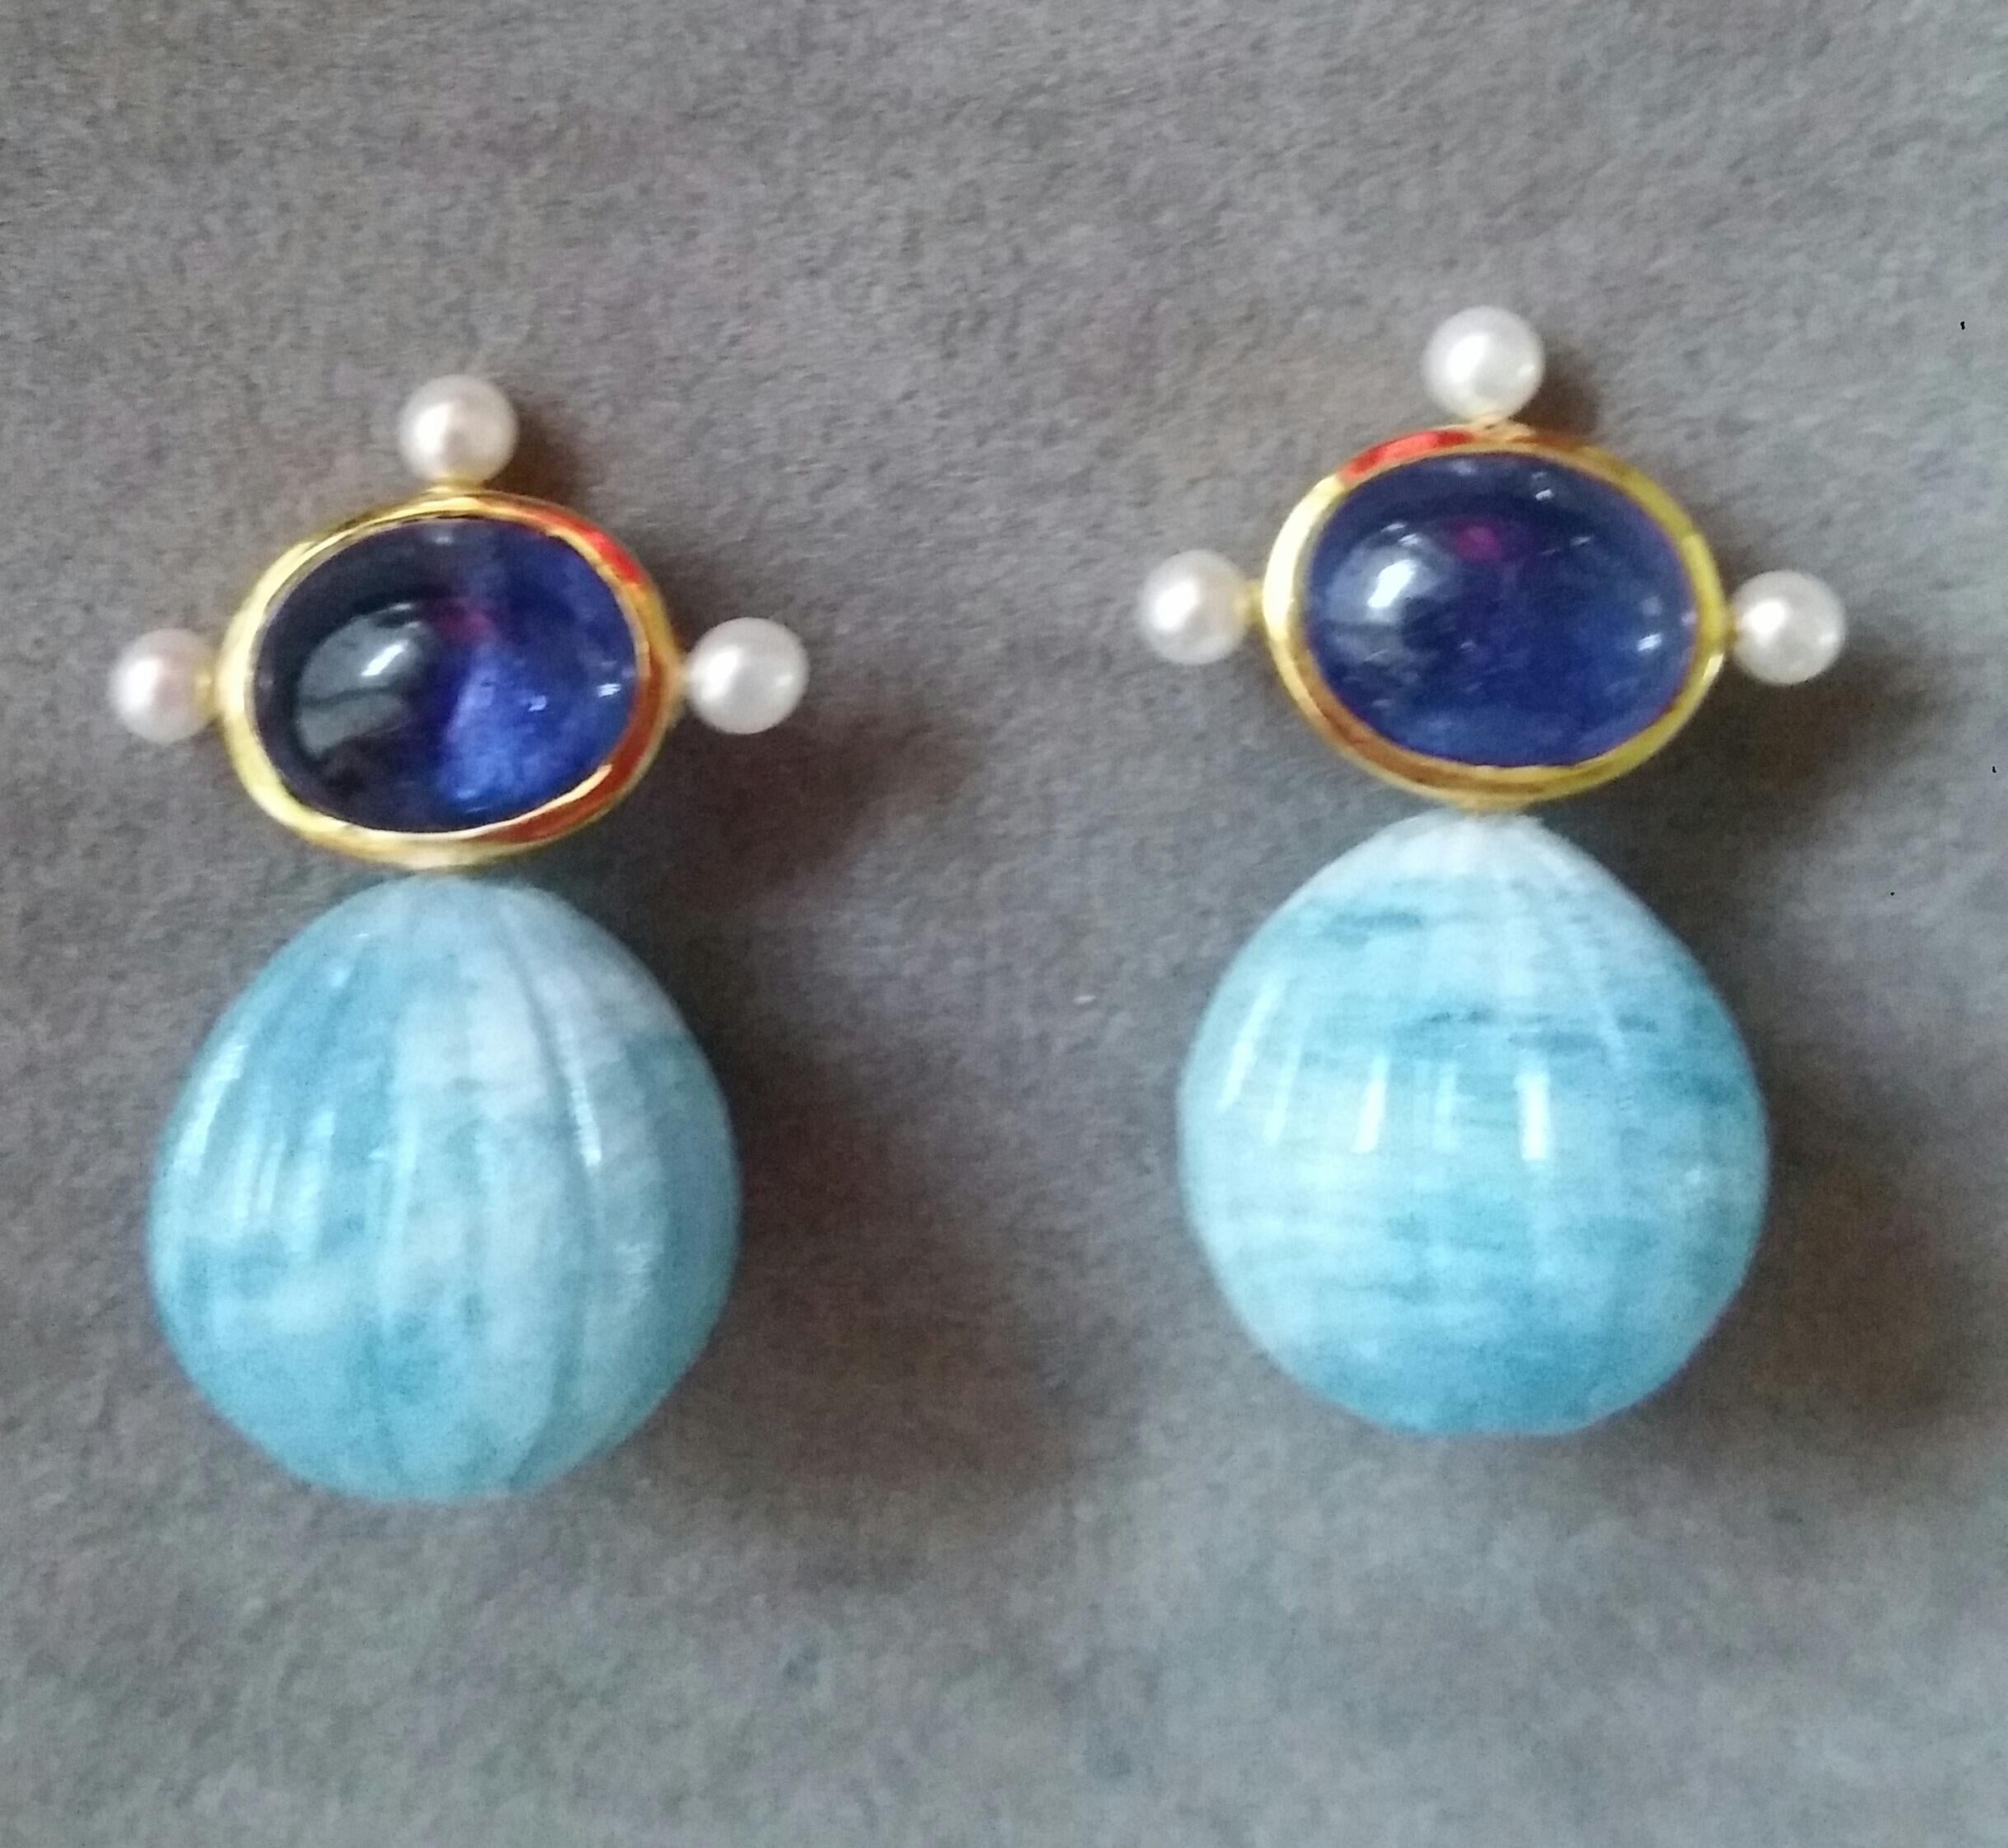 These elegant and handmade earrings have 2 Oval  Blue Sapphire cabs measuring 8 x 10 mm set in a 14 Kt yellow gold bezel with 3 small round pearls of 4mm on 3 sides at the top to which are suspended 2 Engraved  Aquamarine Round Drops measuring 15 x